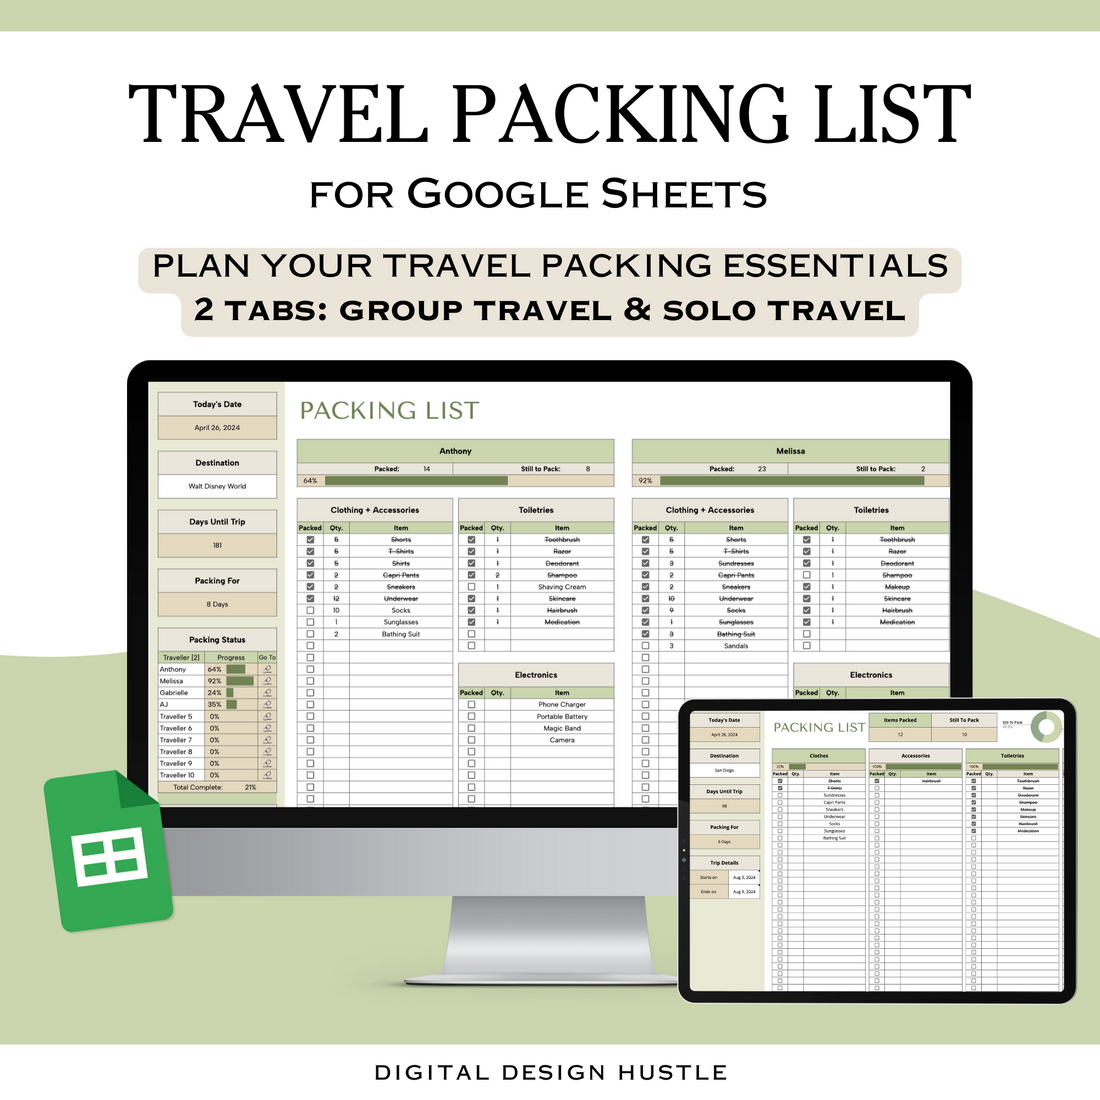 Travel Packing List for Google Sheets